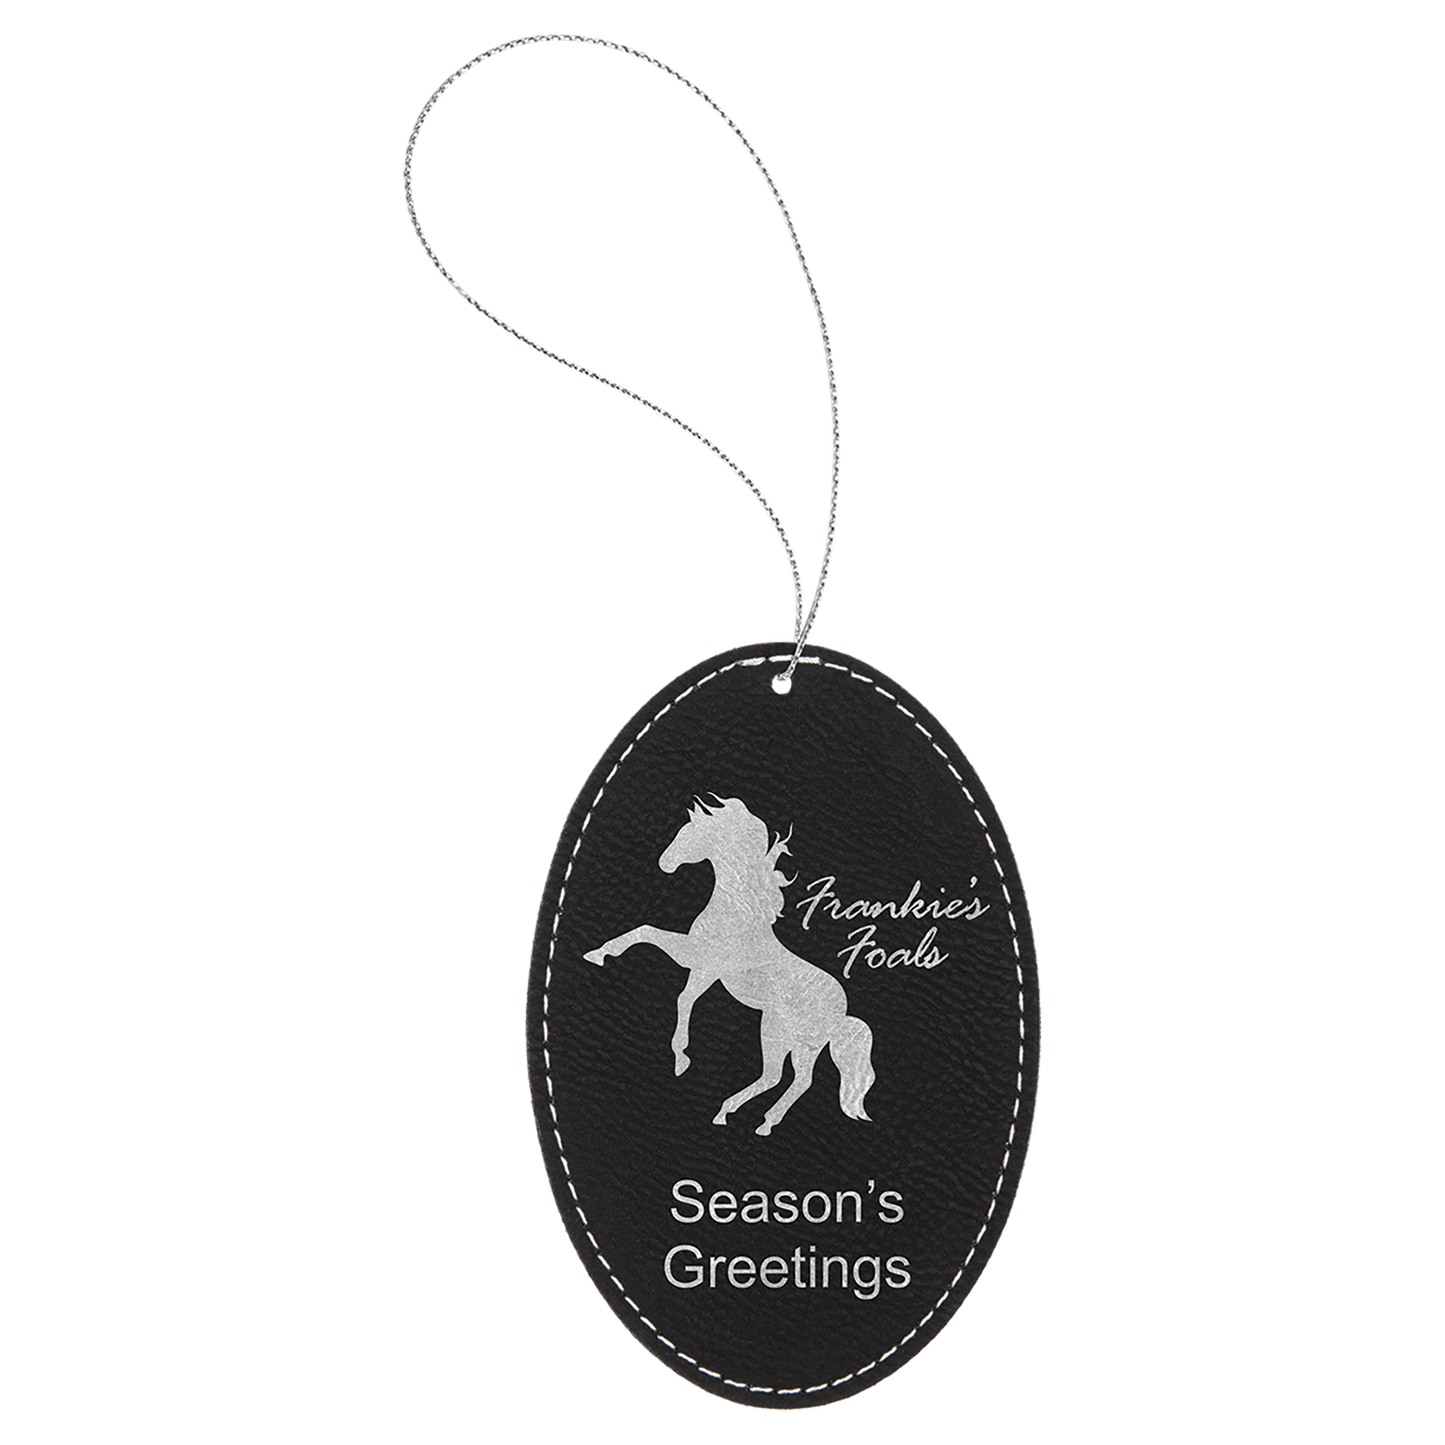 Engraved Leatherette Ornaments